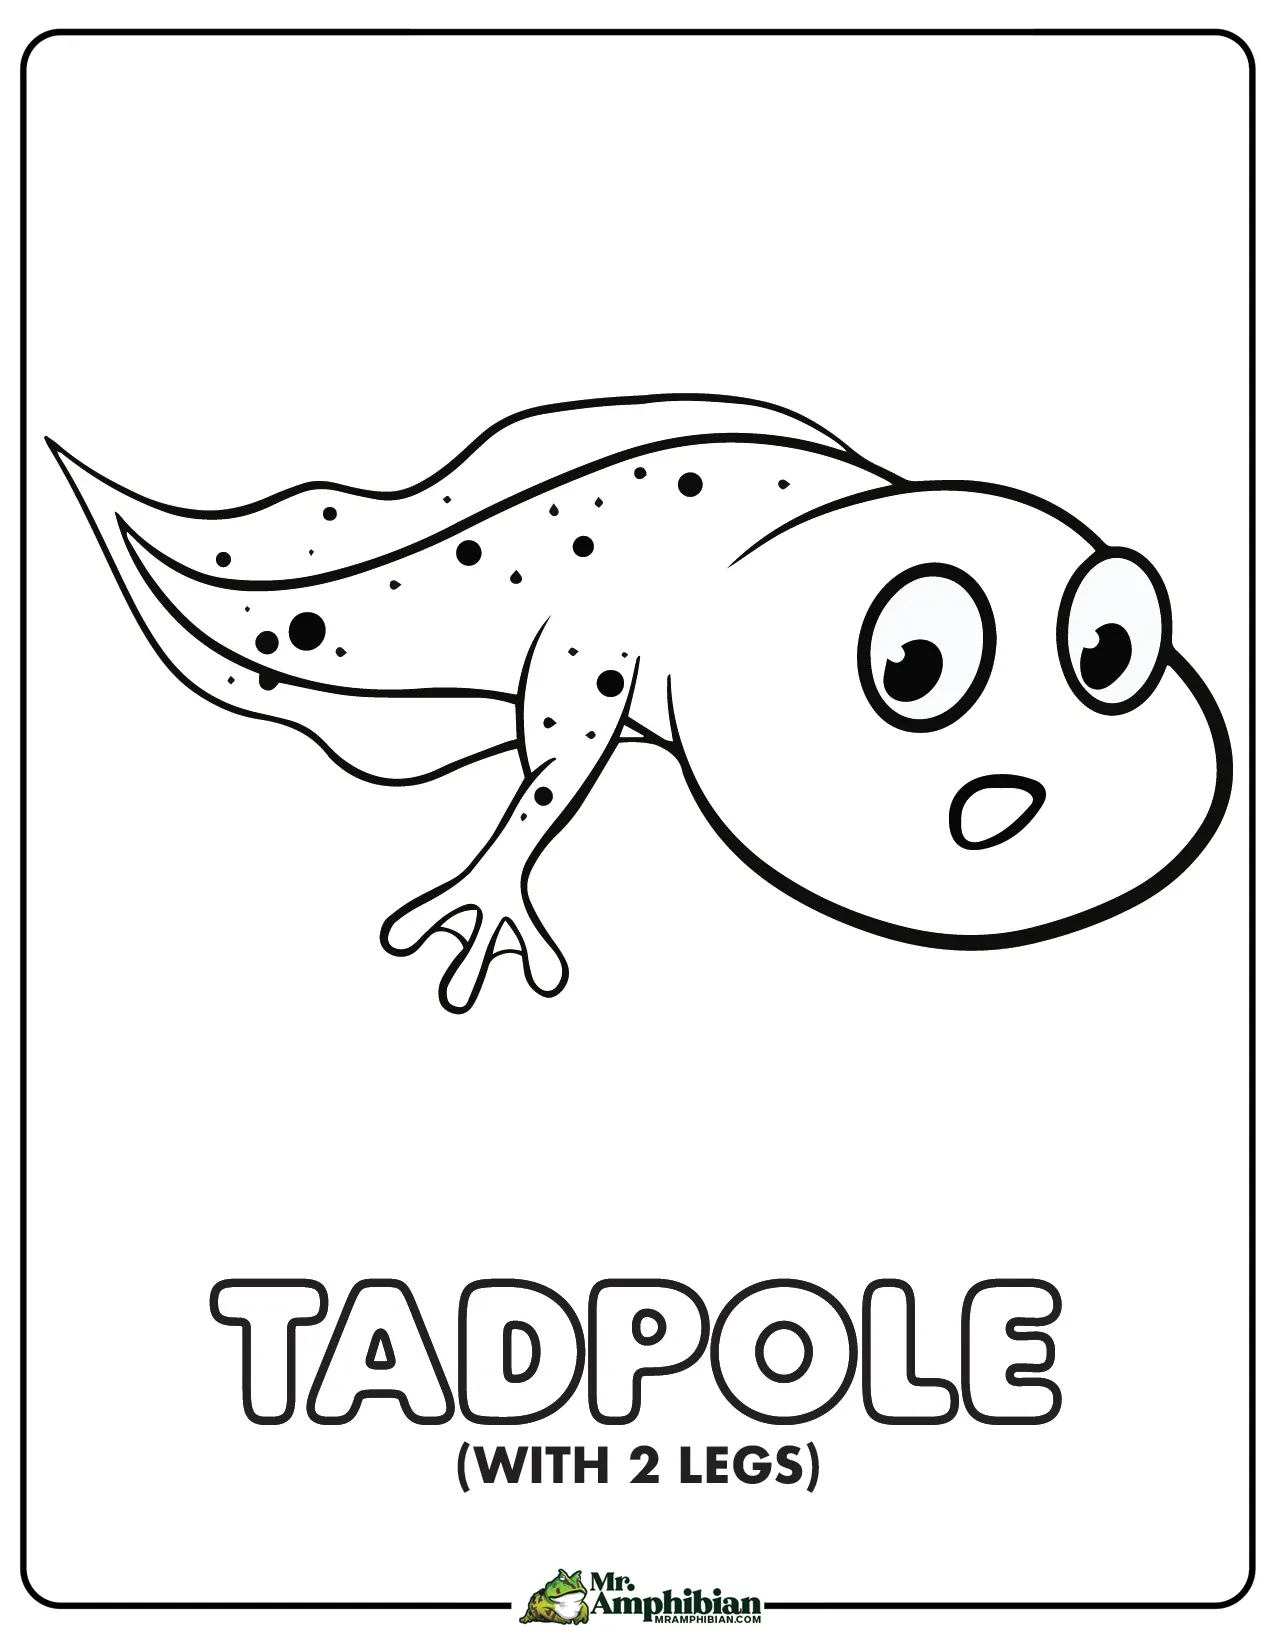 Tadpole Coloring Page 02